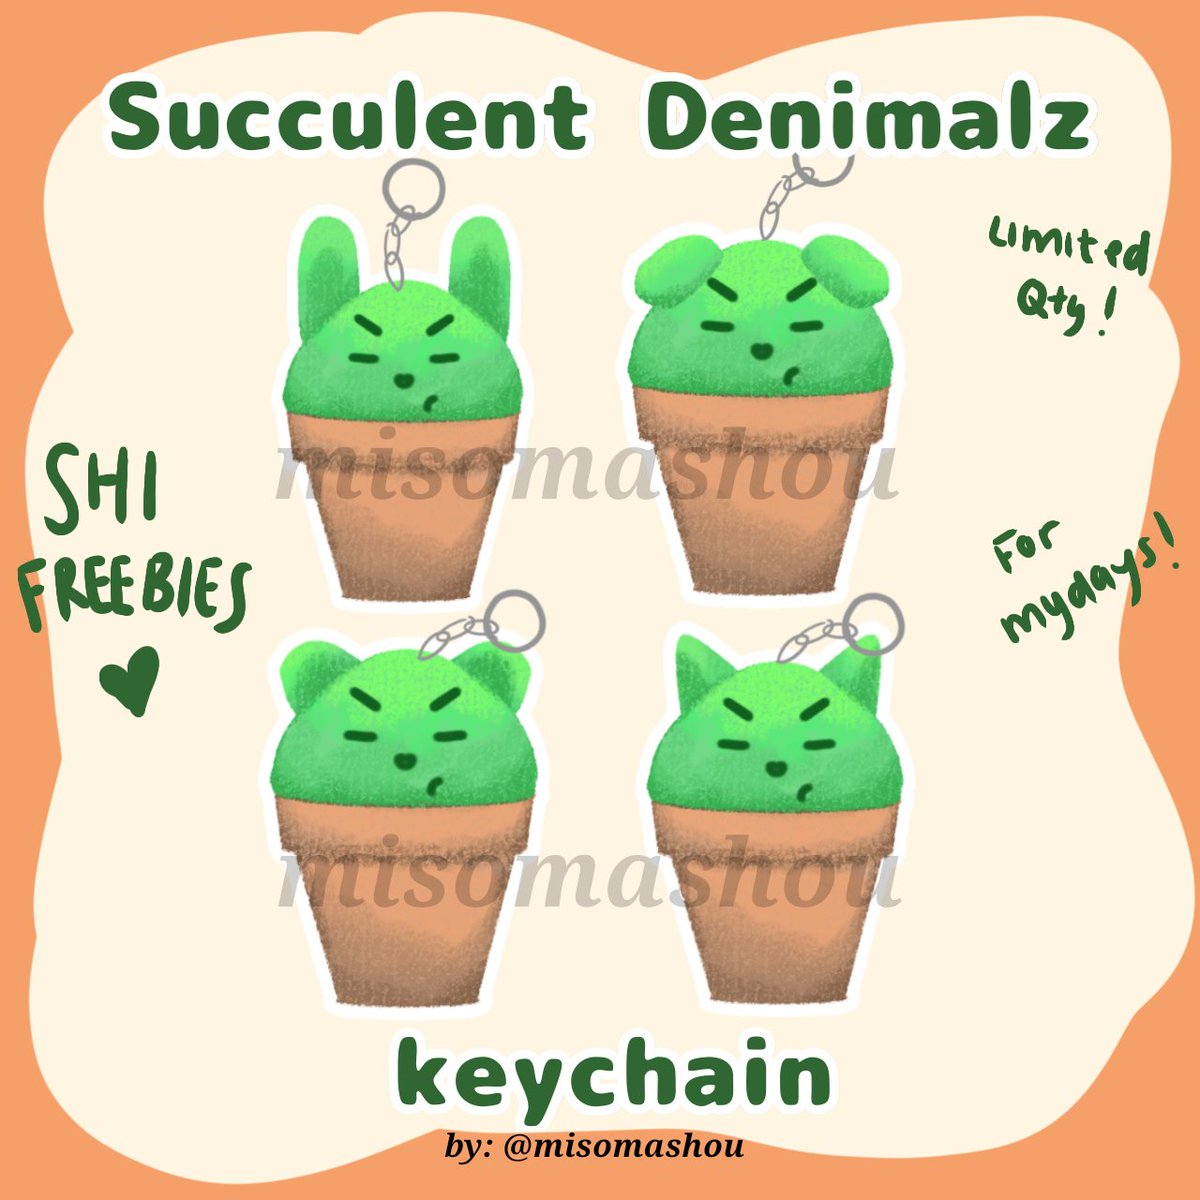 🌵 FREEBIES SHI 2024🌵
Succulent Denimalz keychain 😾 by @misomashou 

🗓 May 4th, 2024
📍 BCIS 
⏳️TBA

🍀 for myday only
🍀 limited qty
🍀 open for trade (limited slot) -> DM
🍀 rts/likes will be appreciated

How to claim?
Just rt/like this tweet and say hi!

SEE U AT VENUE😘